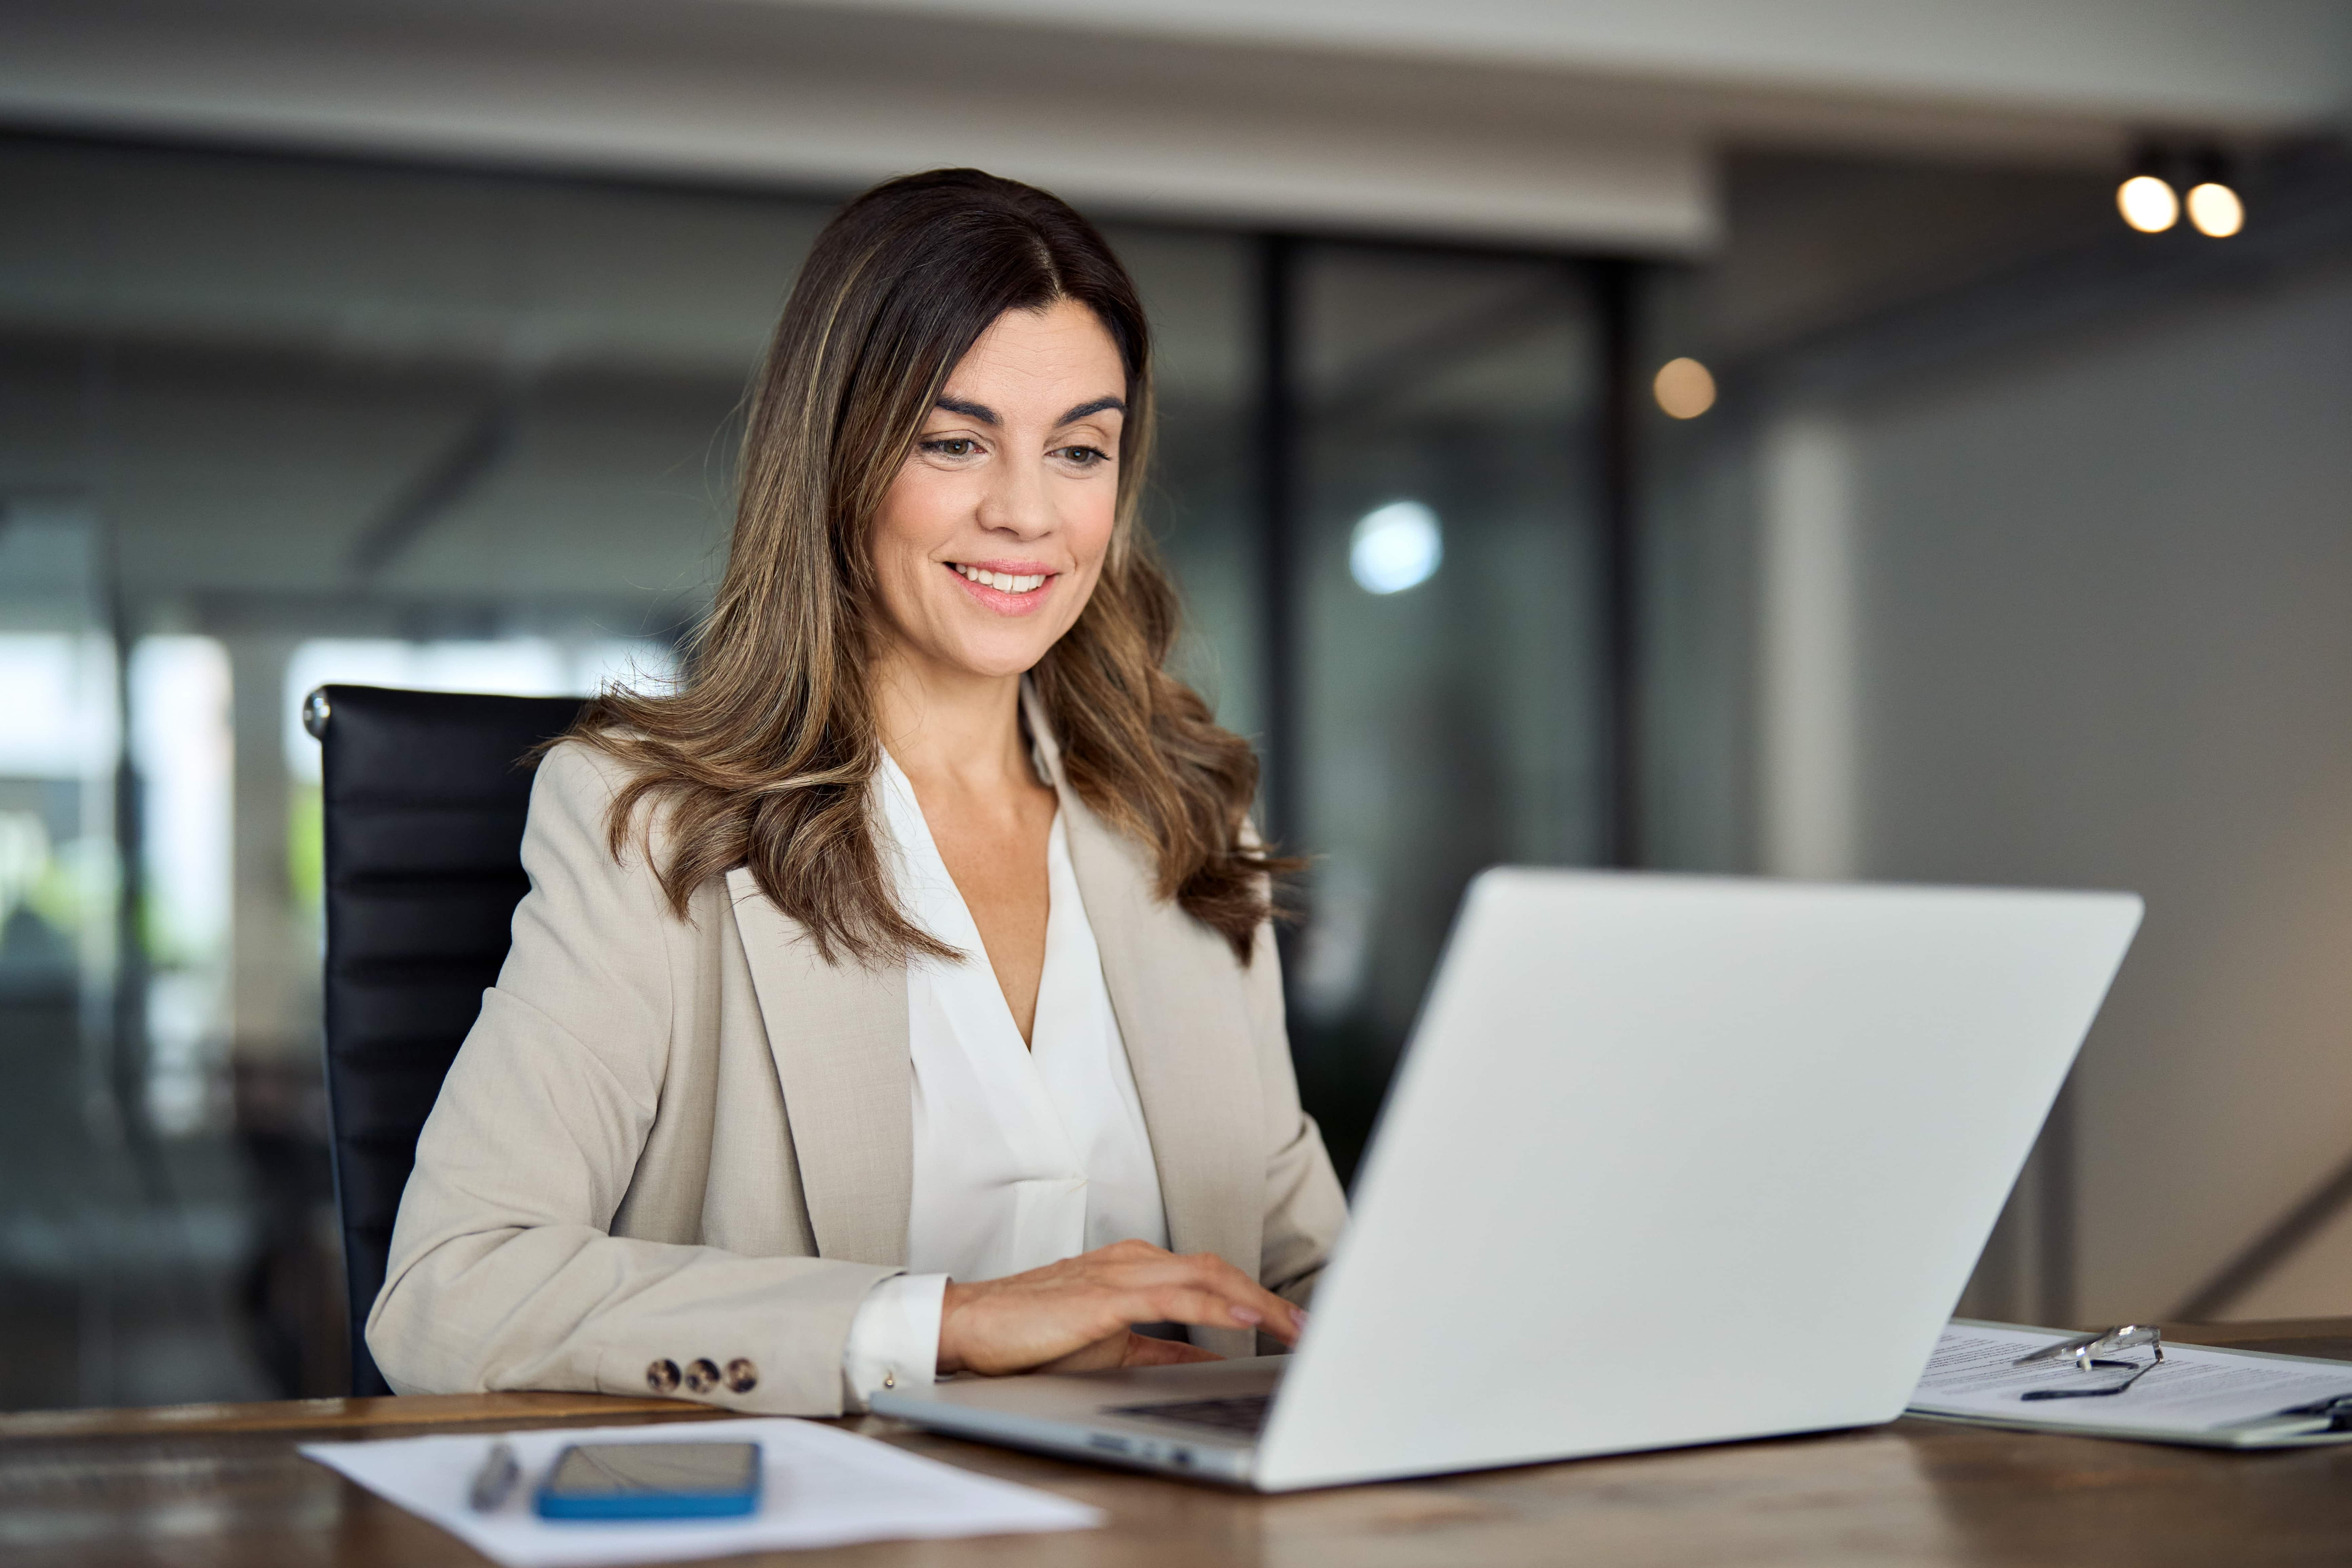 smiling woman in professional attire looking at her laptop